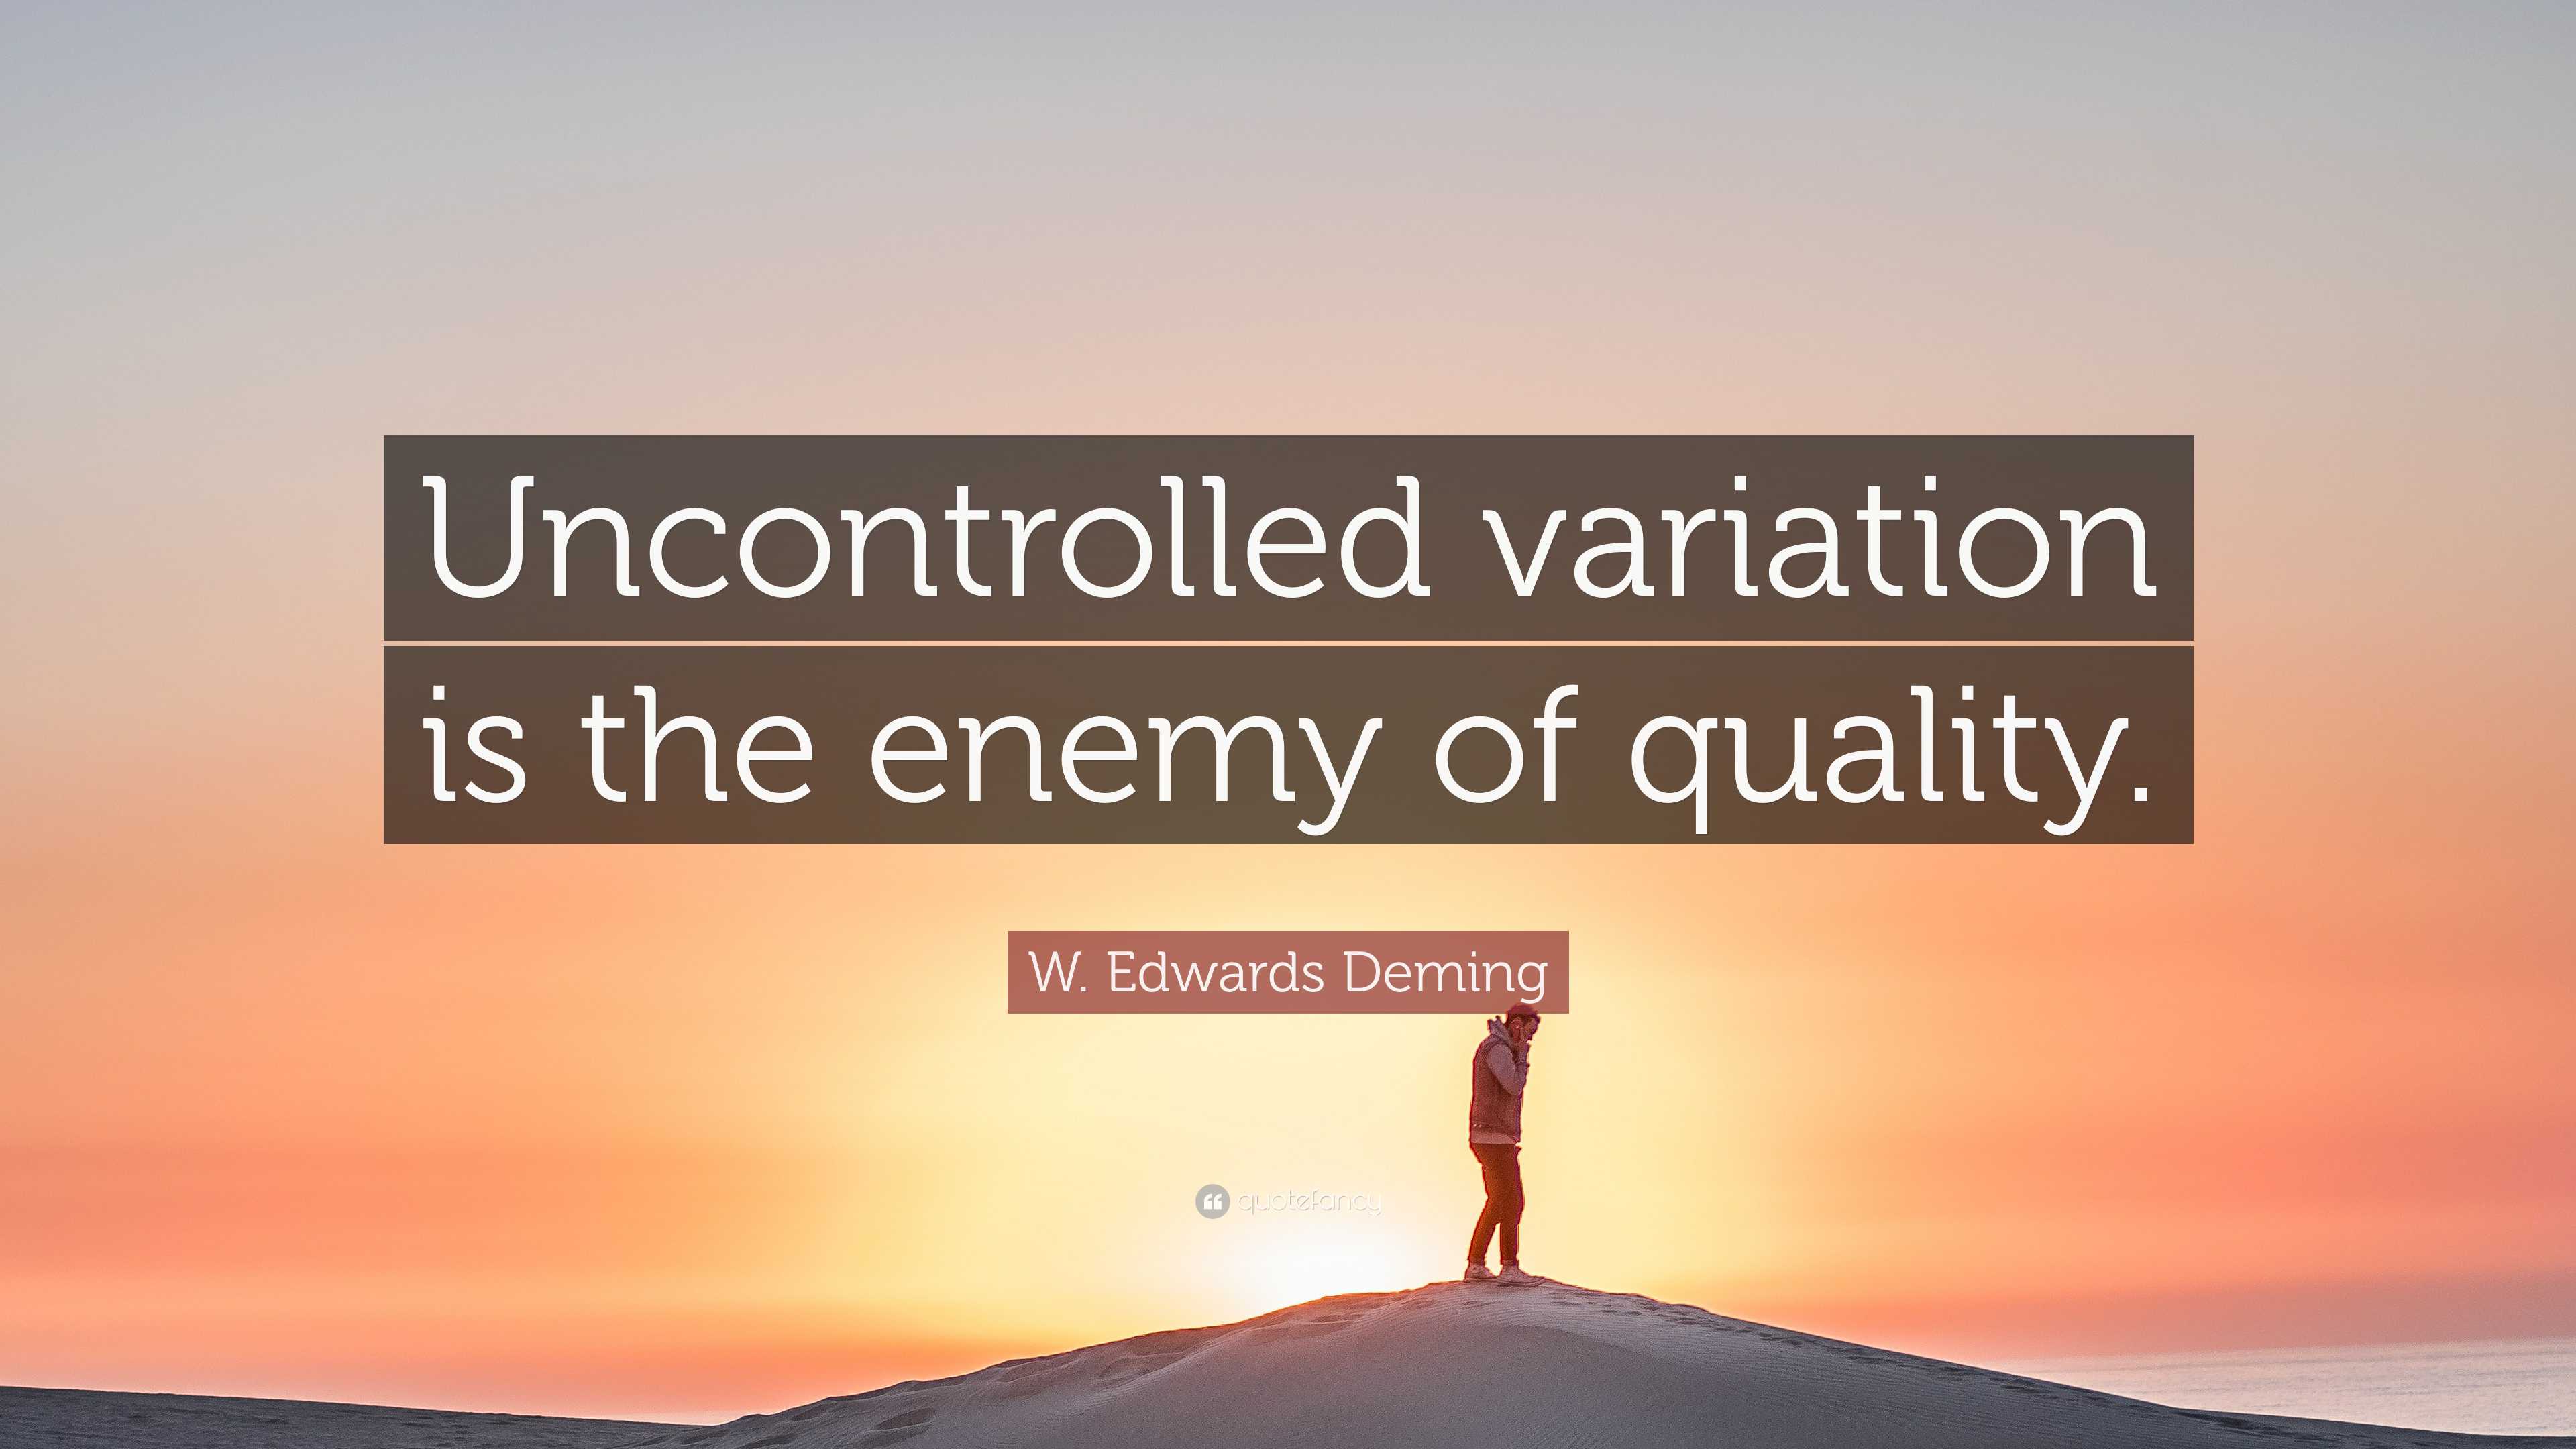 W. Edwards Deming Quote: “Uncontrolled variation is the enemy of quality.”